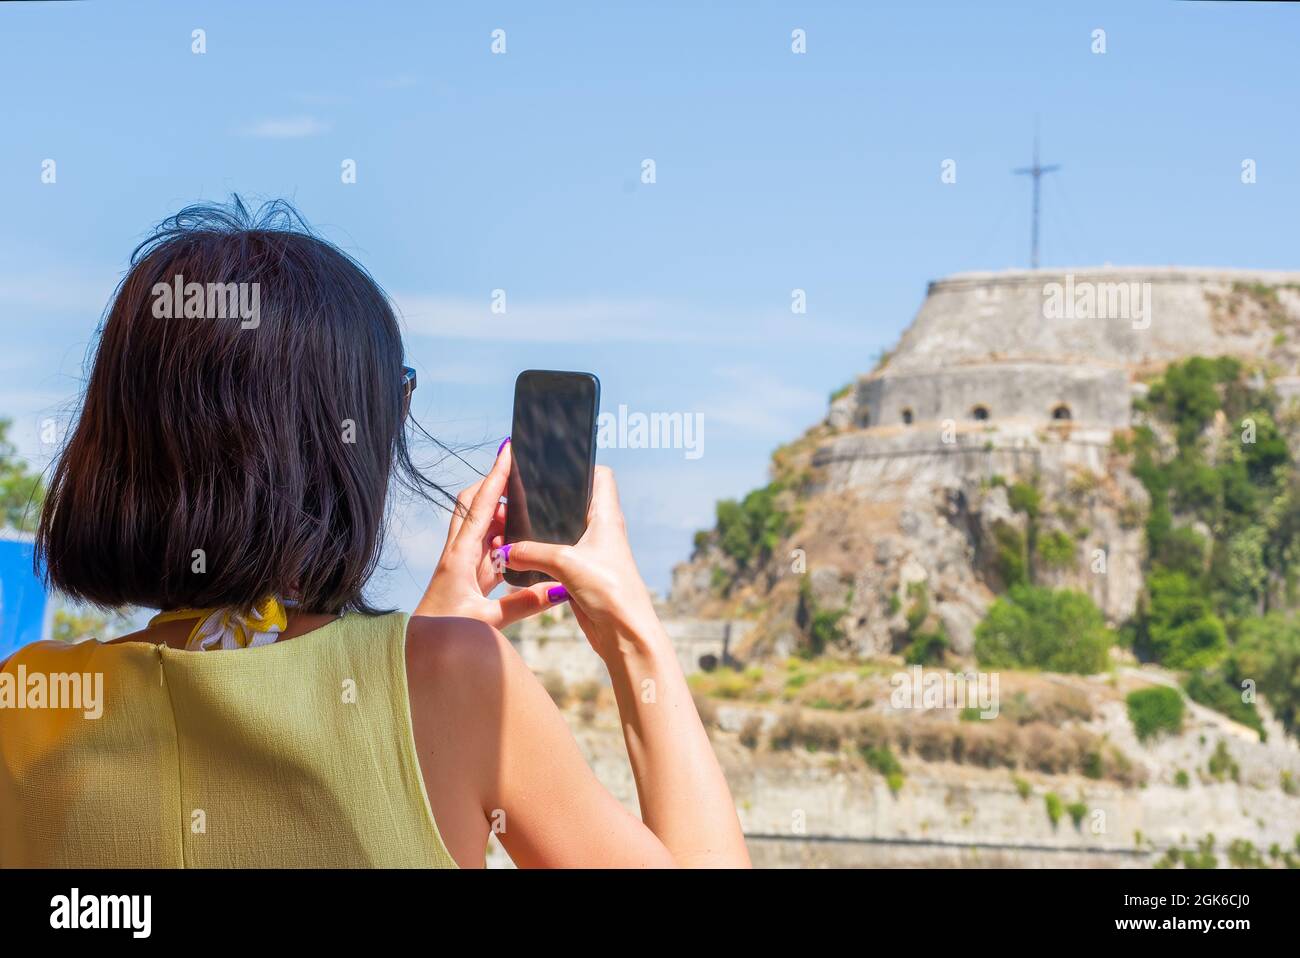 Images of tourists in or near Corfu town Stock Photo